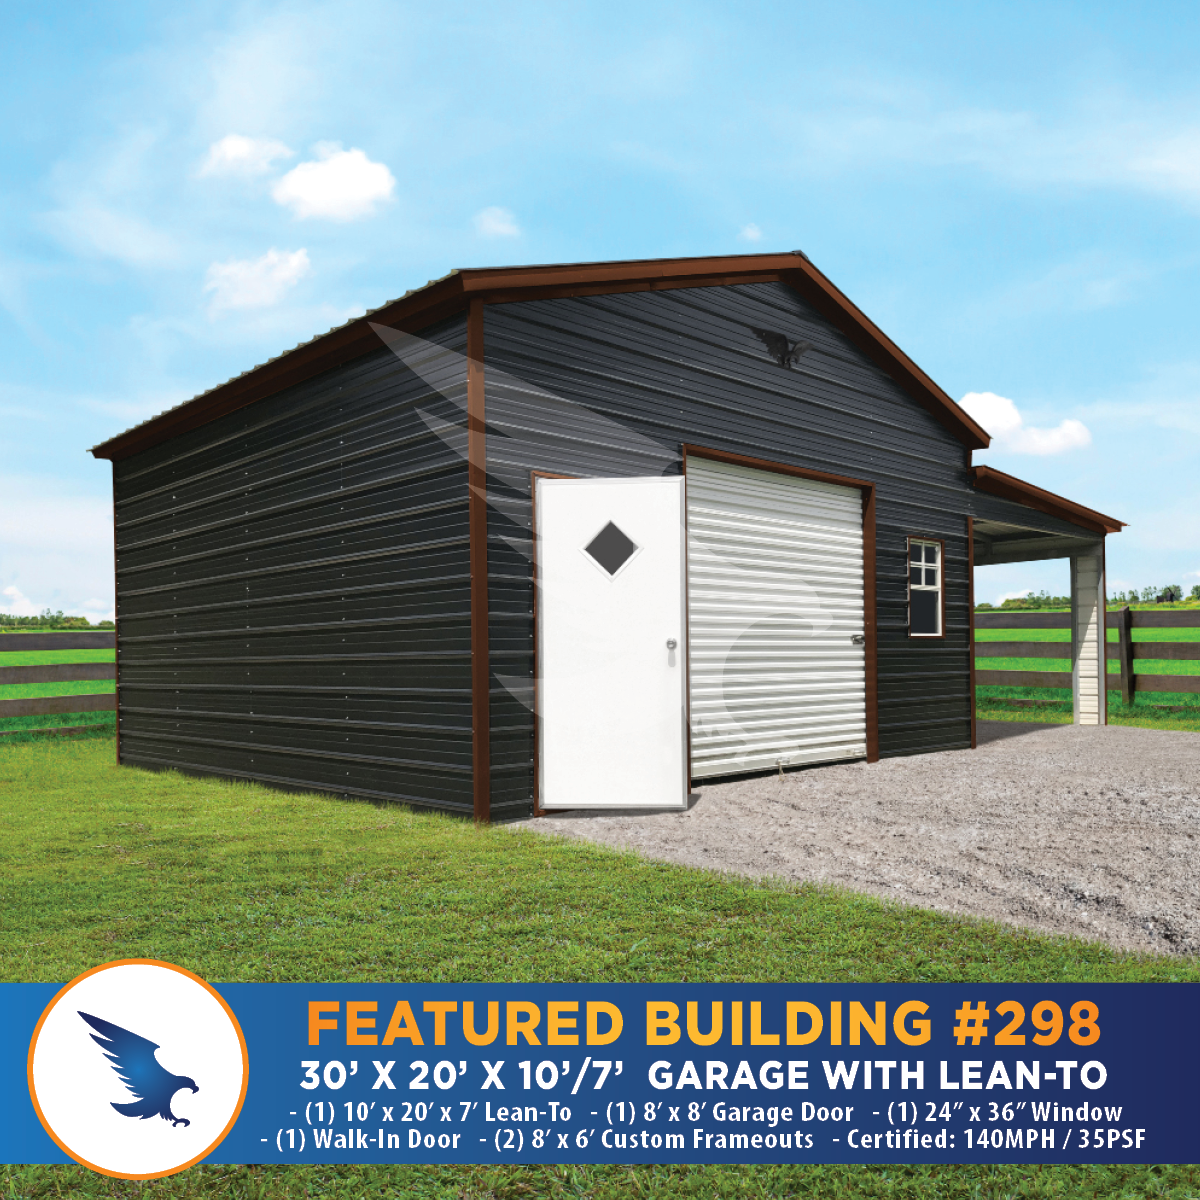 #298 30' x 20' x 10'/7' Garage with Lean-To Eagle Featured Building-Top Quality Carports Garages Sheds Cabins Mini Barns Greenhouses Chicken Coops